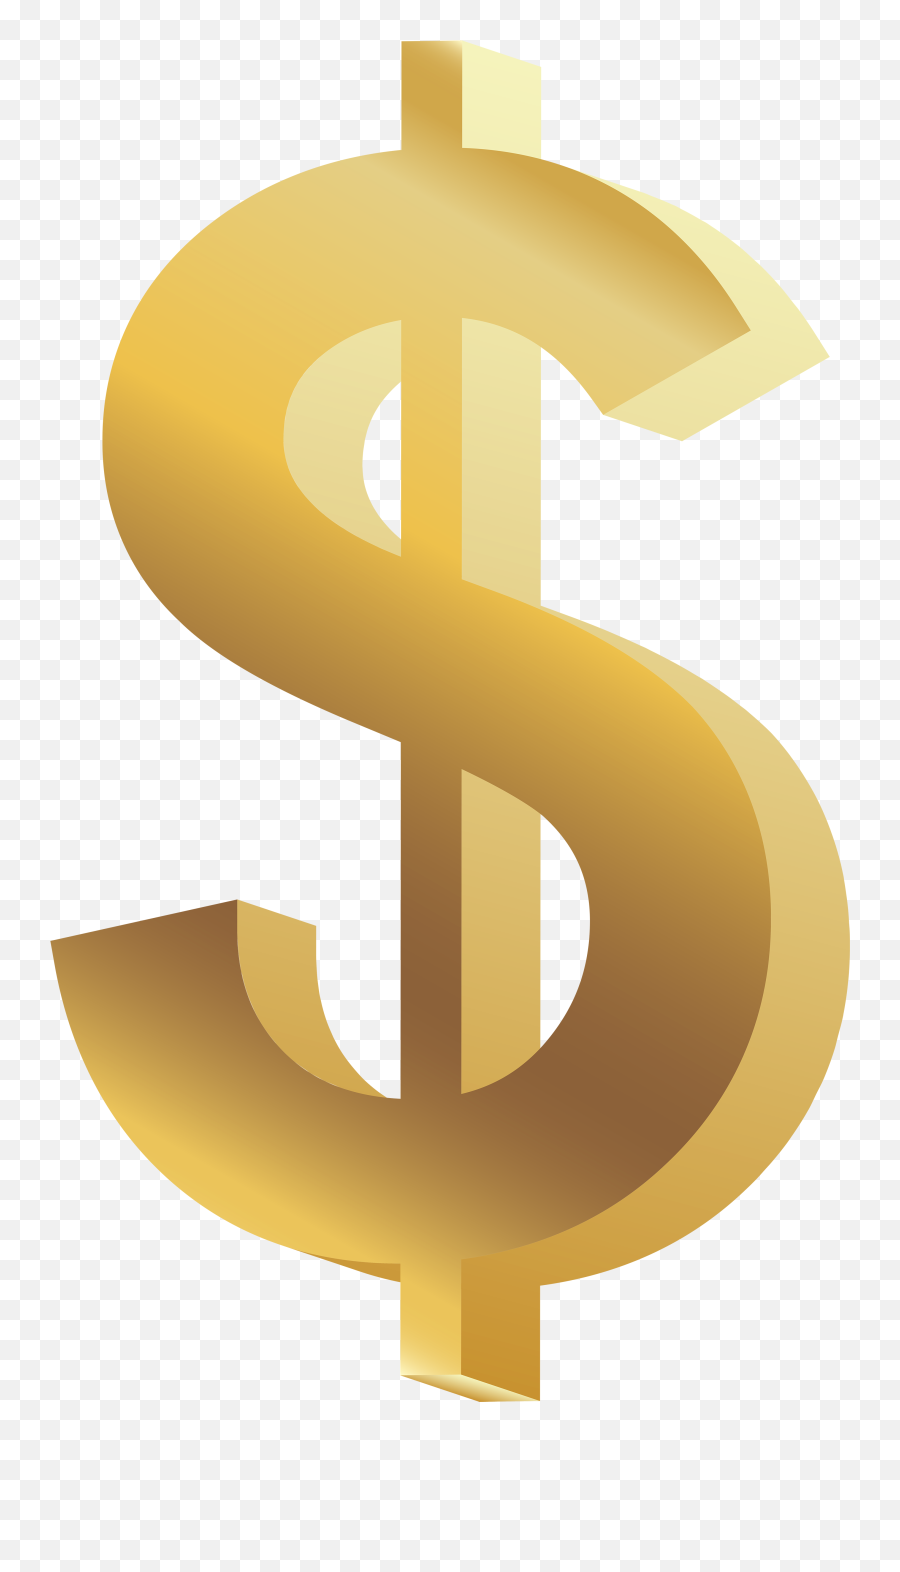 Library Of Person With Money Signs As Eyes Vector Free - Money Signs Clip Art Emoji,Money Sign Emoji